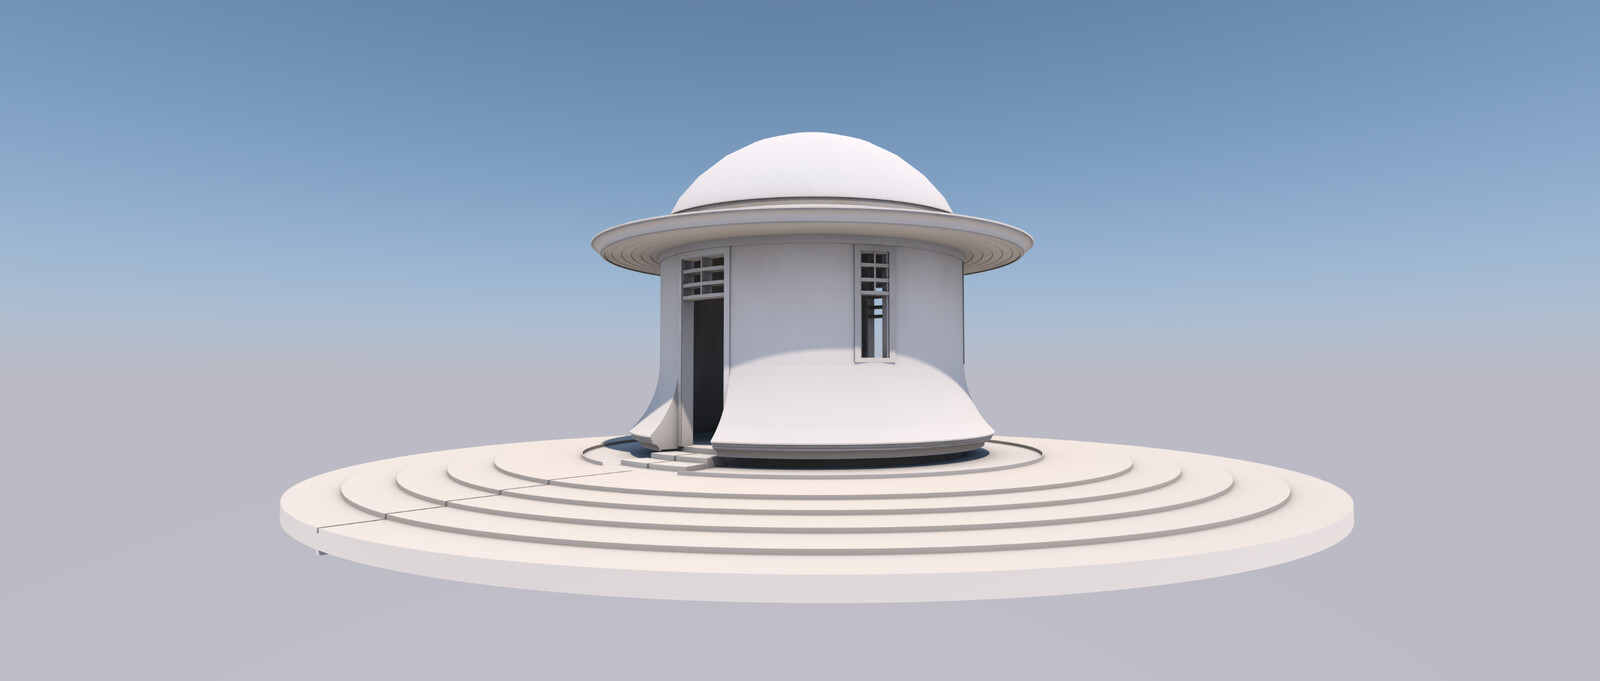 Original white model render exported from ArchiCAD.